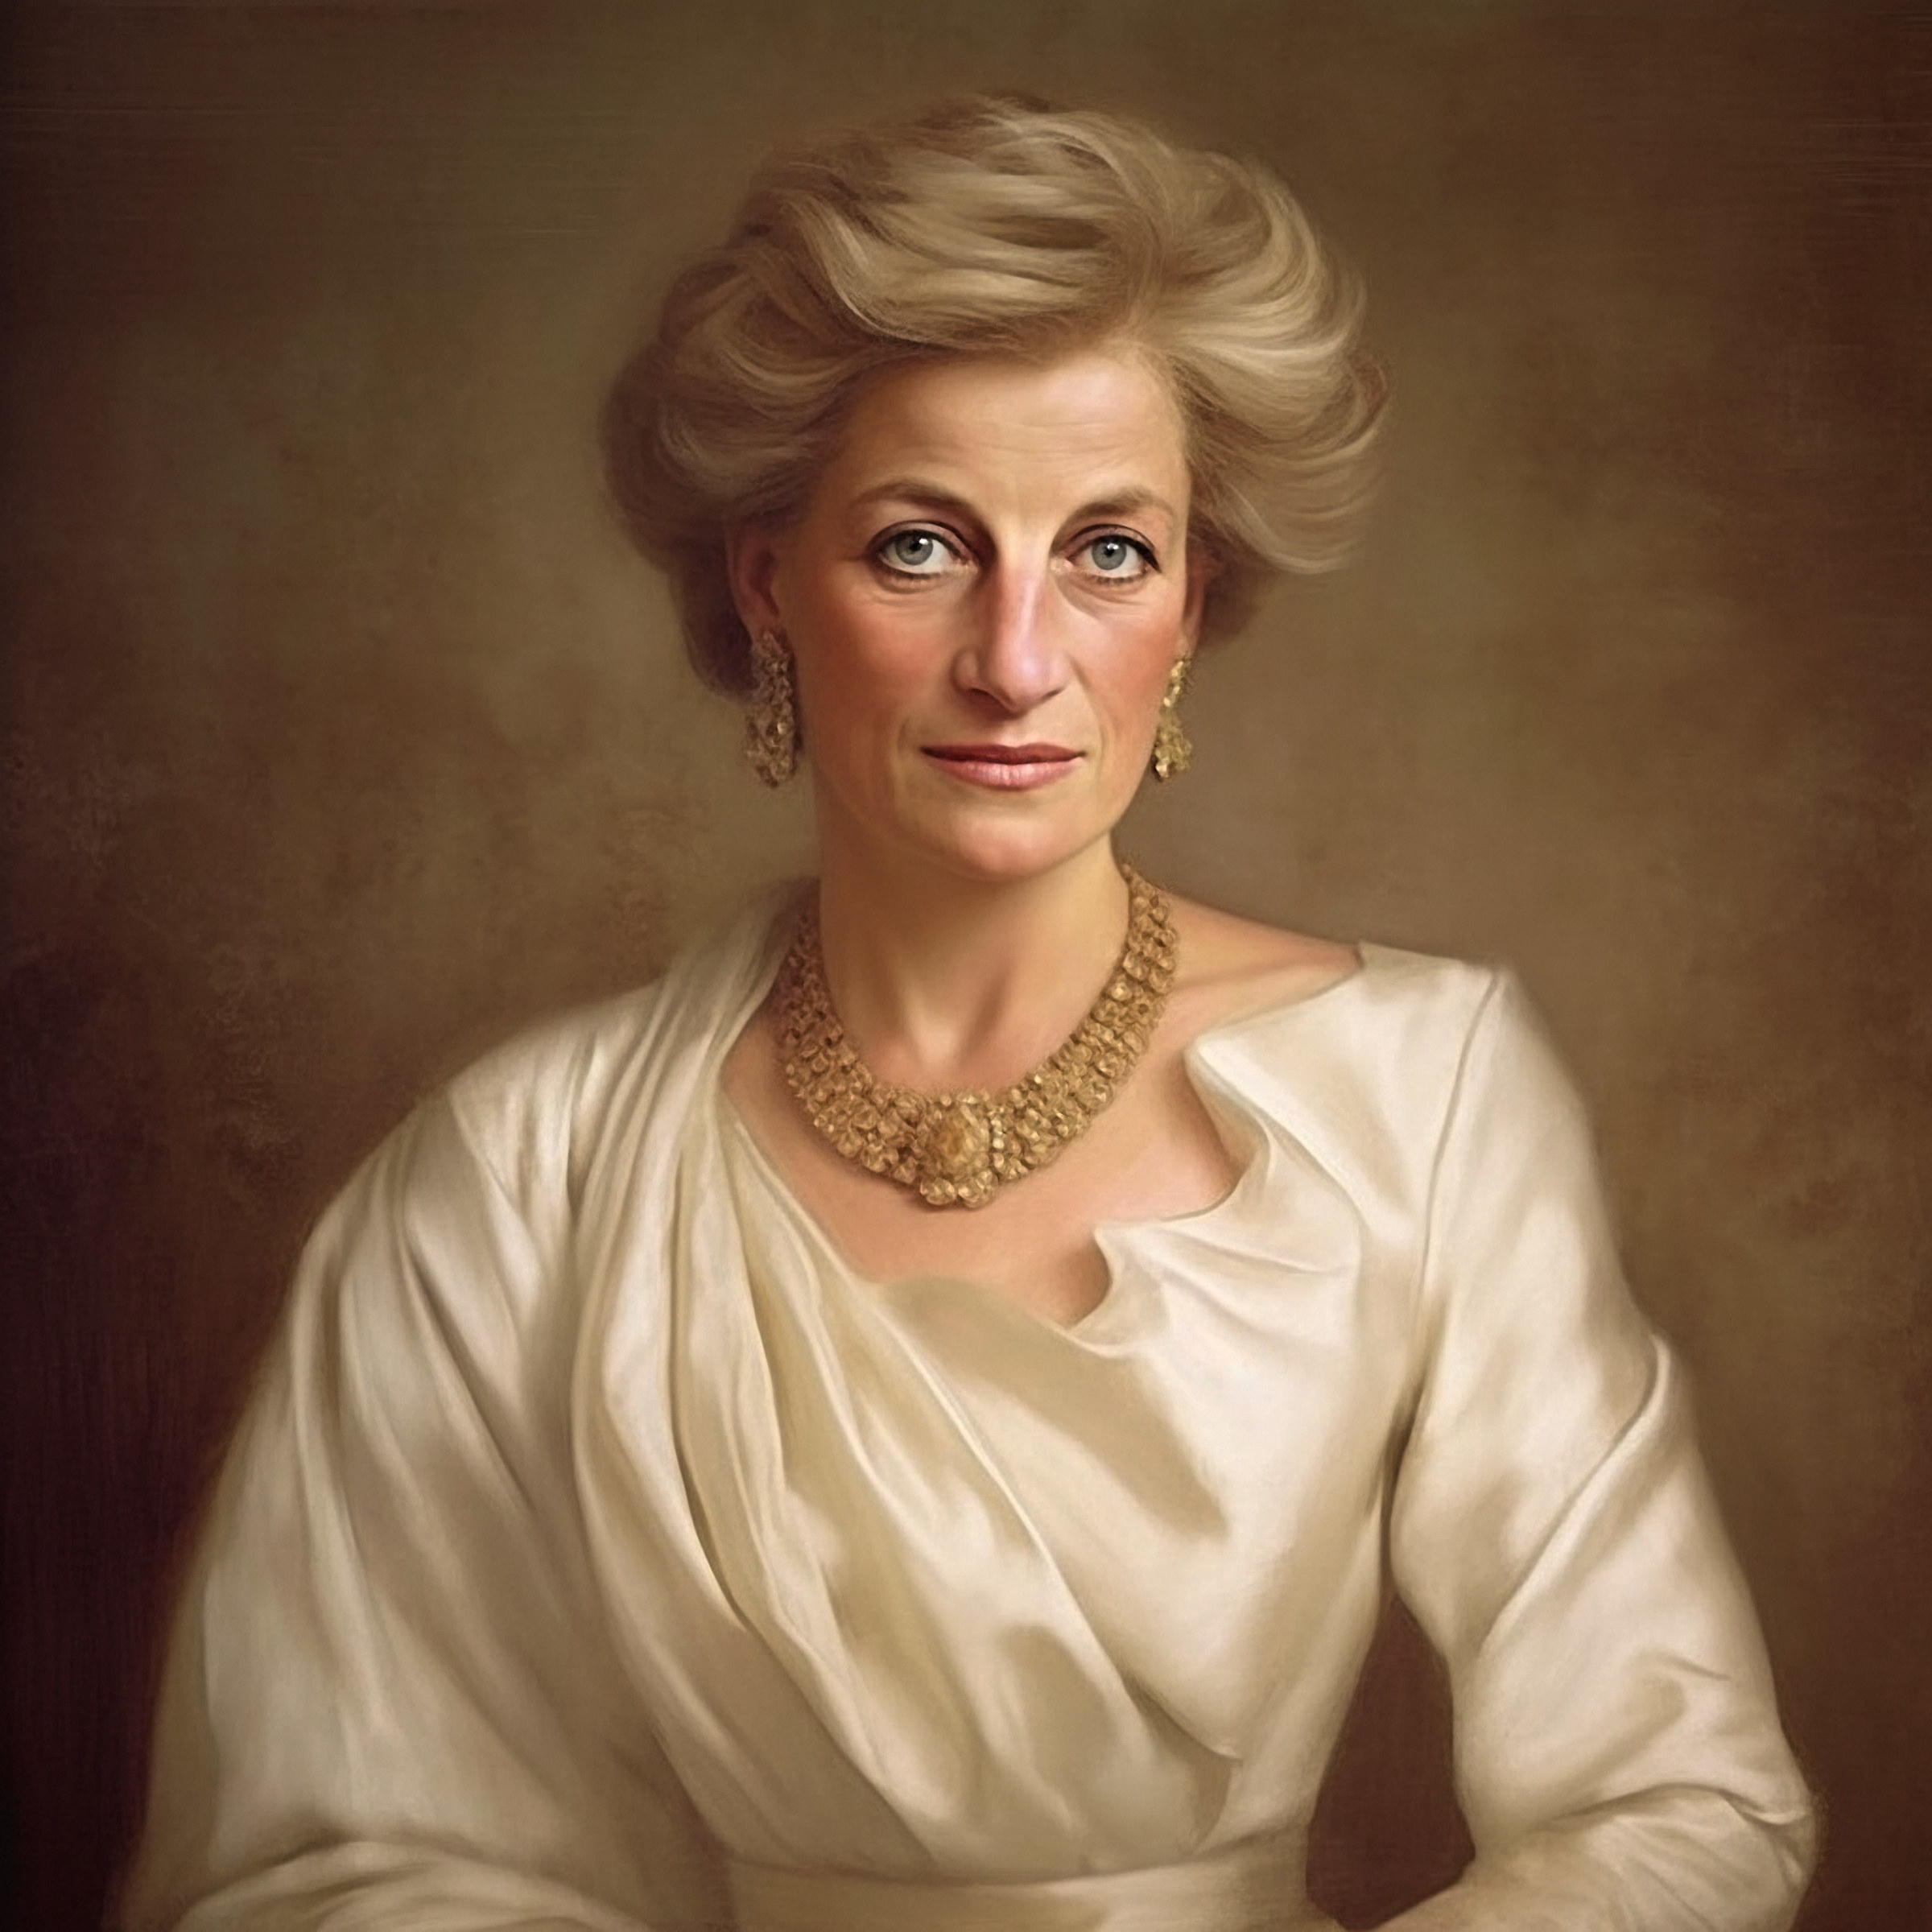 Princess Diana imagined as an older person